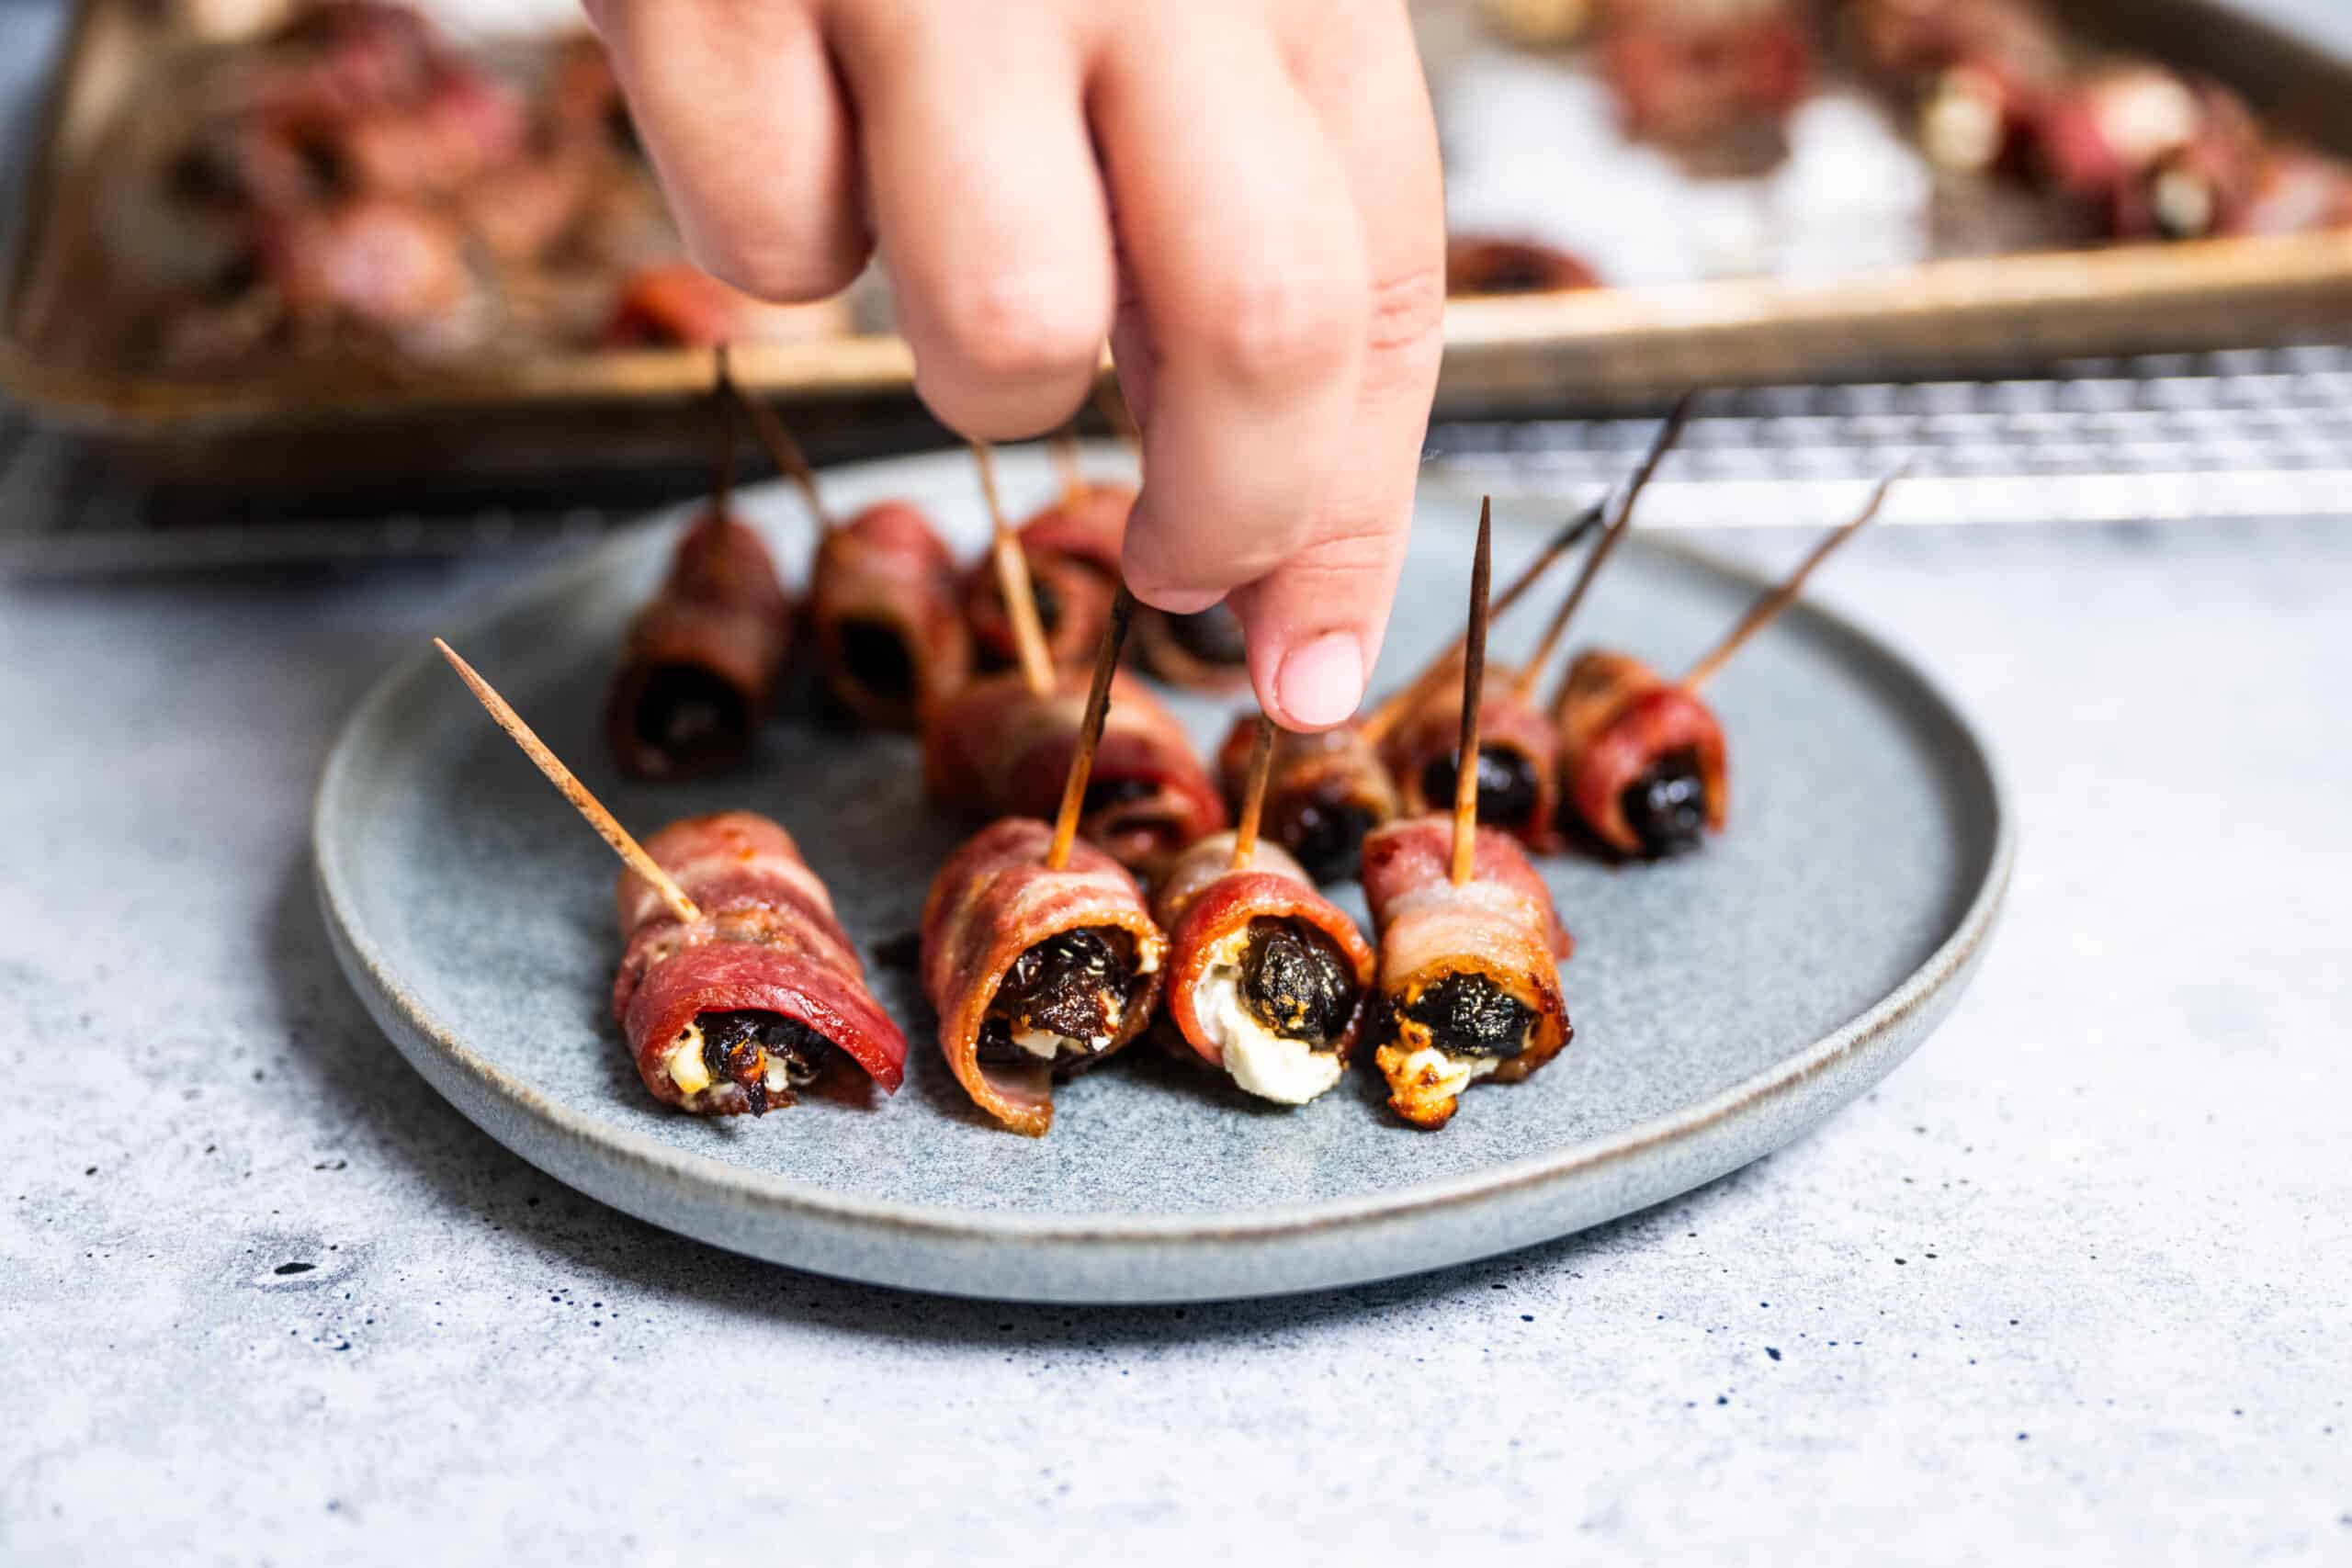 Devils on Horseback - Prunes stuffed with Goat cheese and wrapped in bacon Hand reaching to grab a bacon wrapped prune